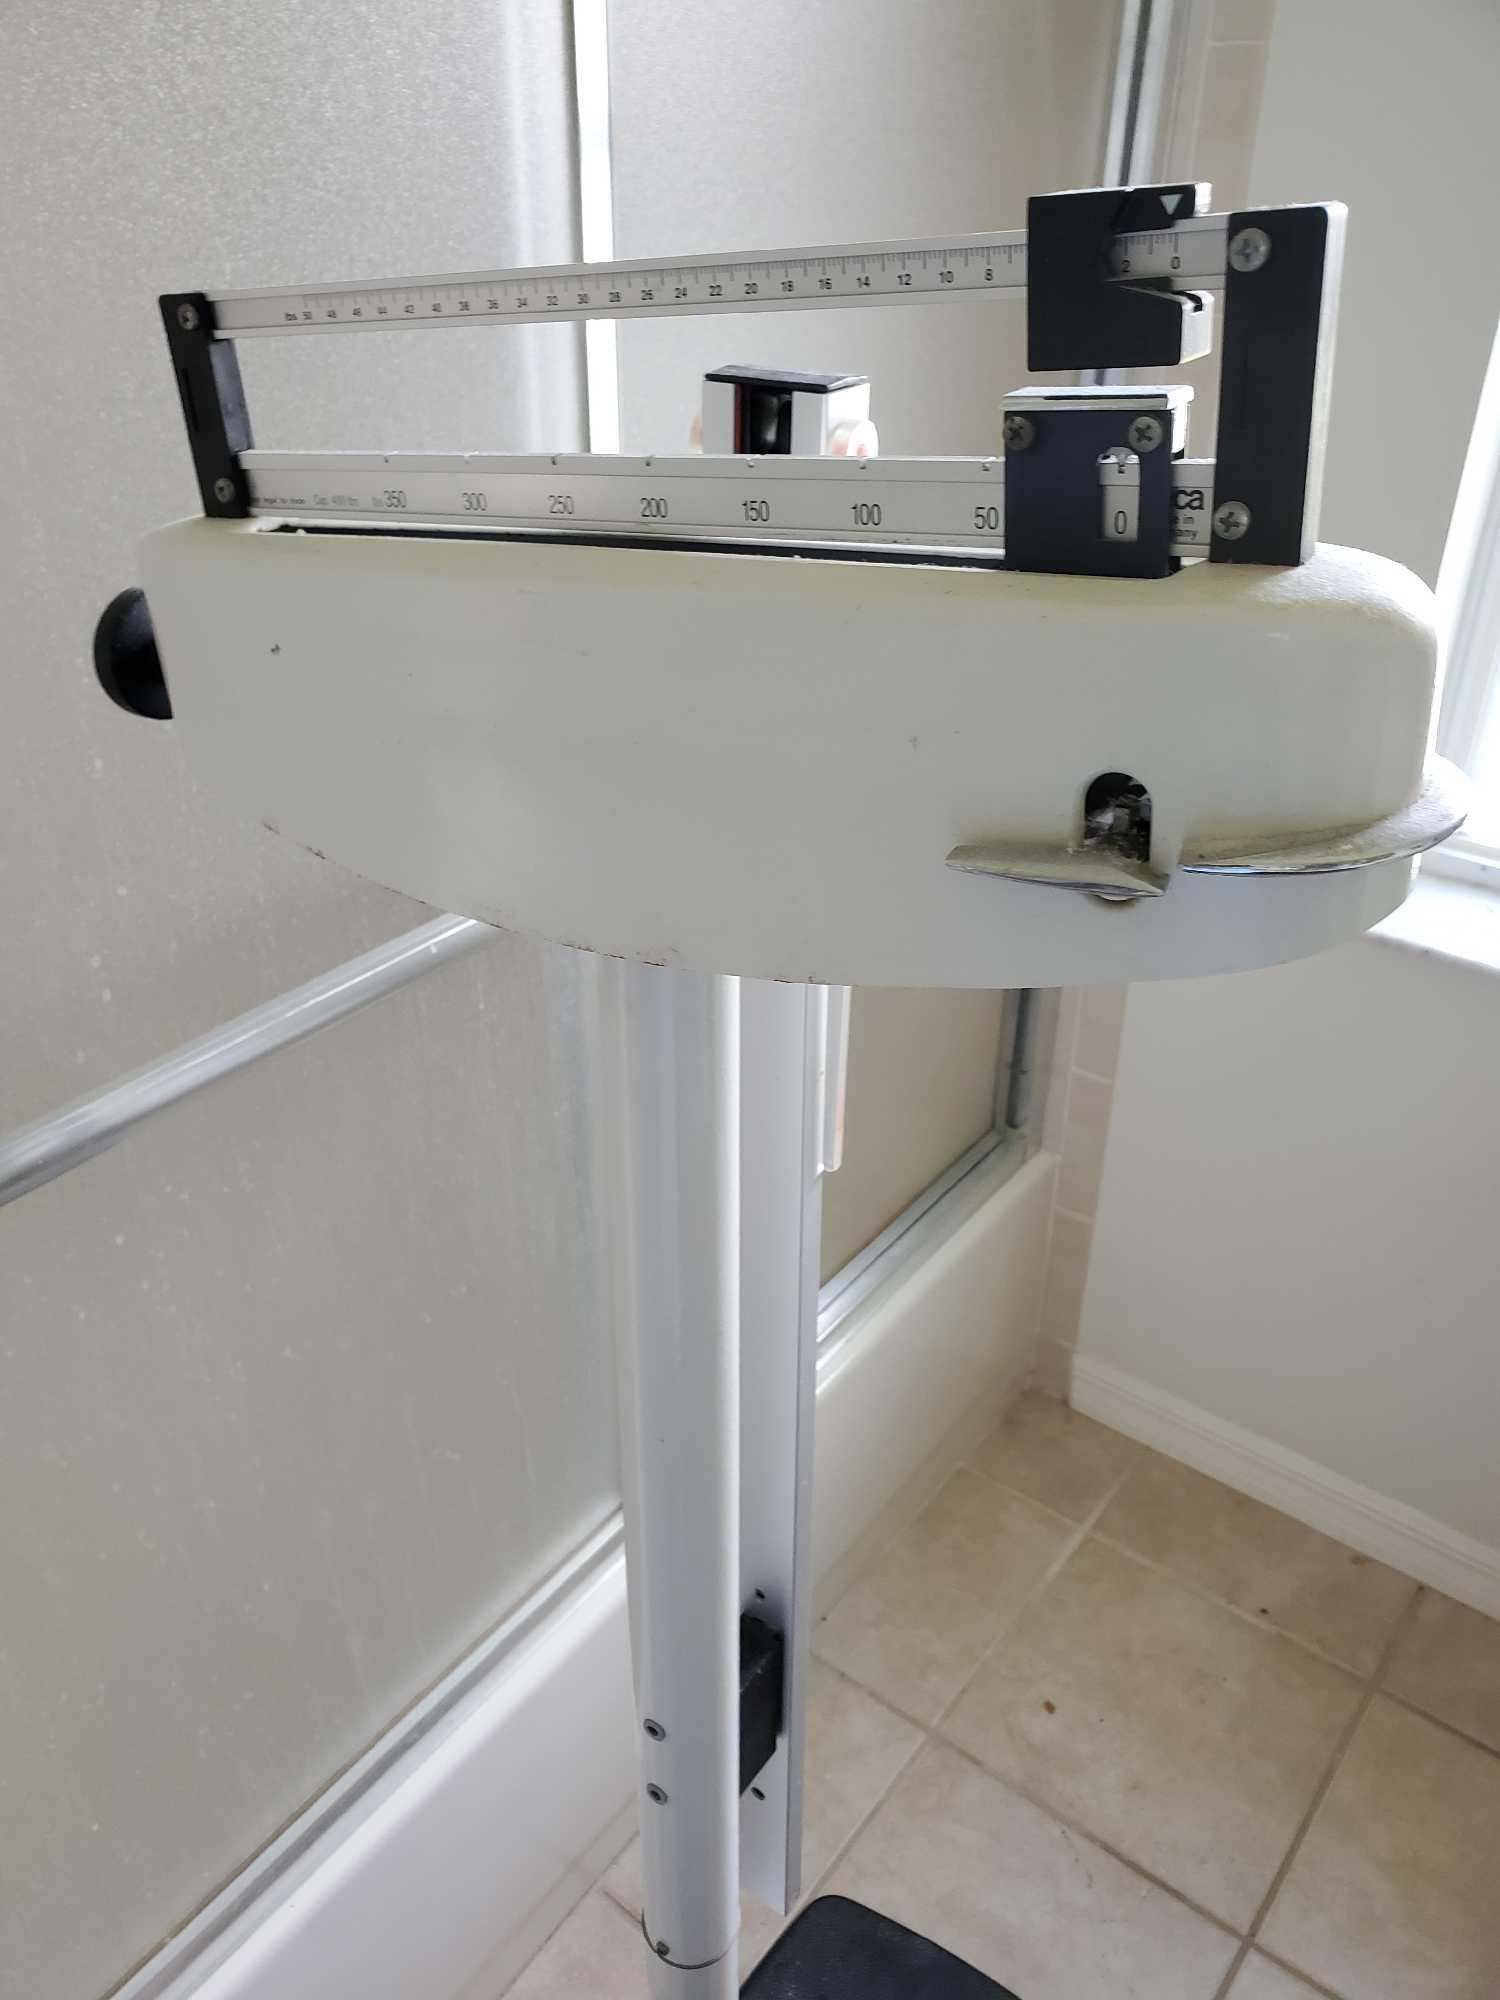 SECA professional bathroom scale, made in Germany